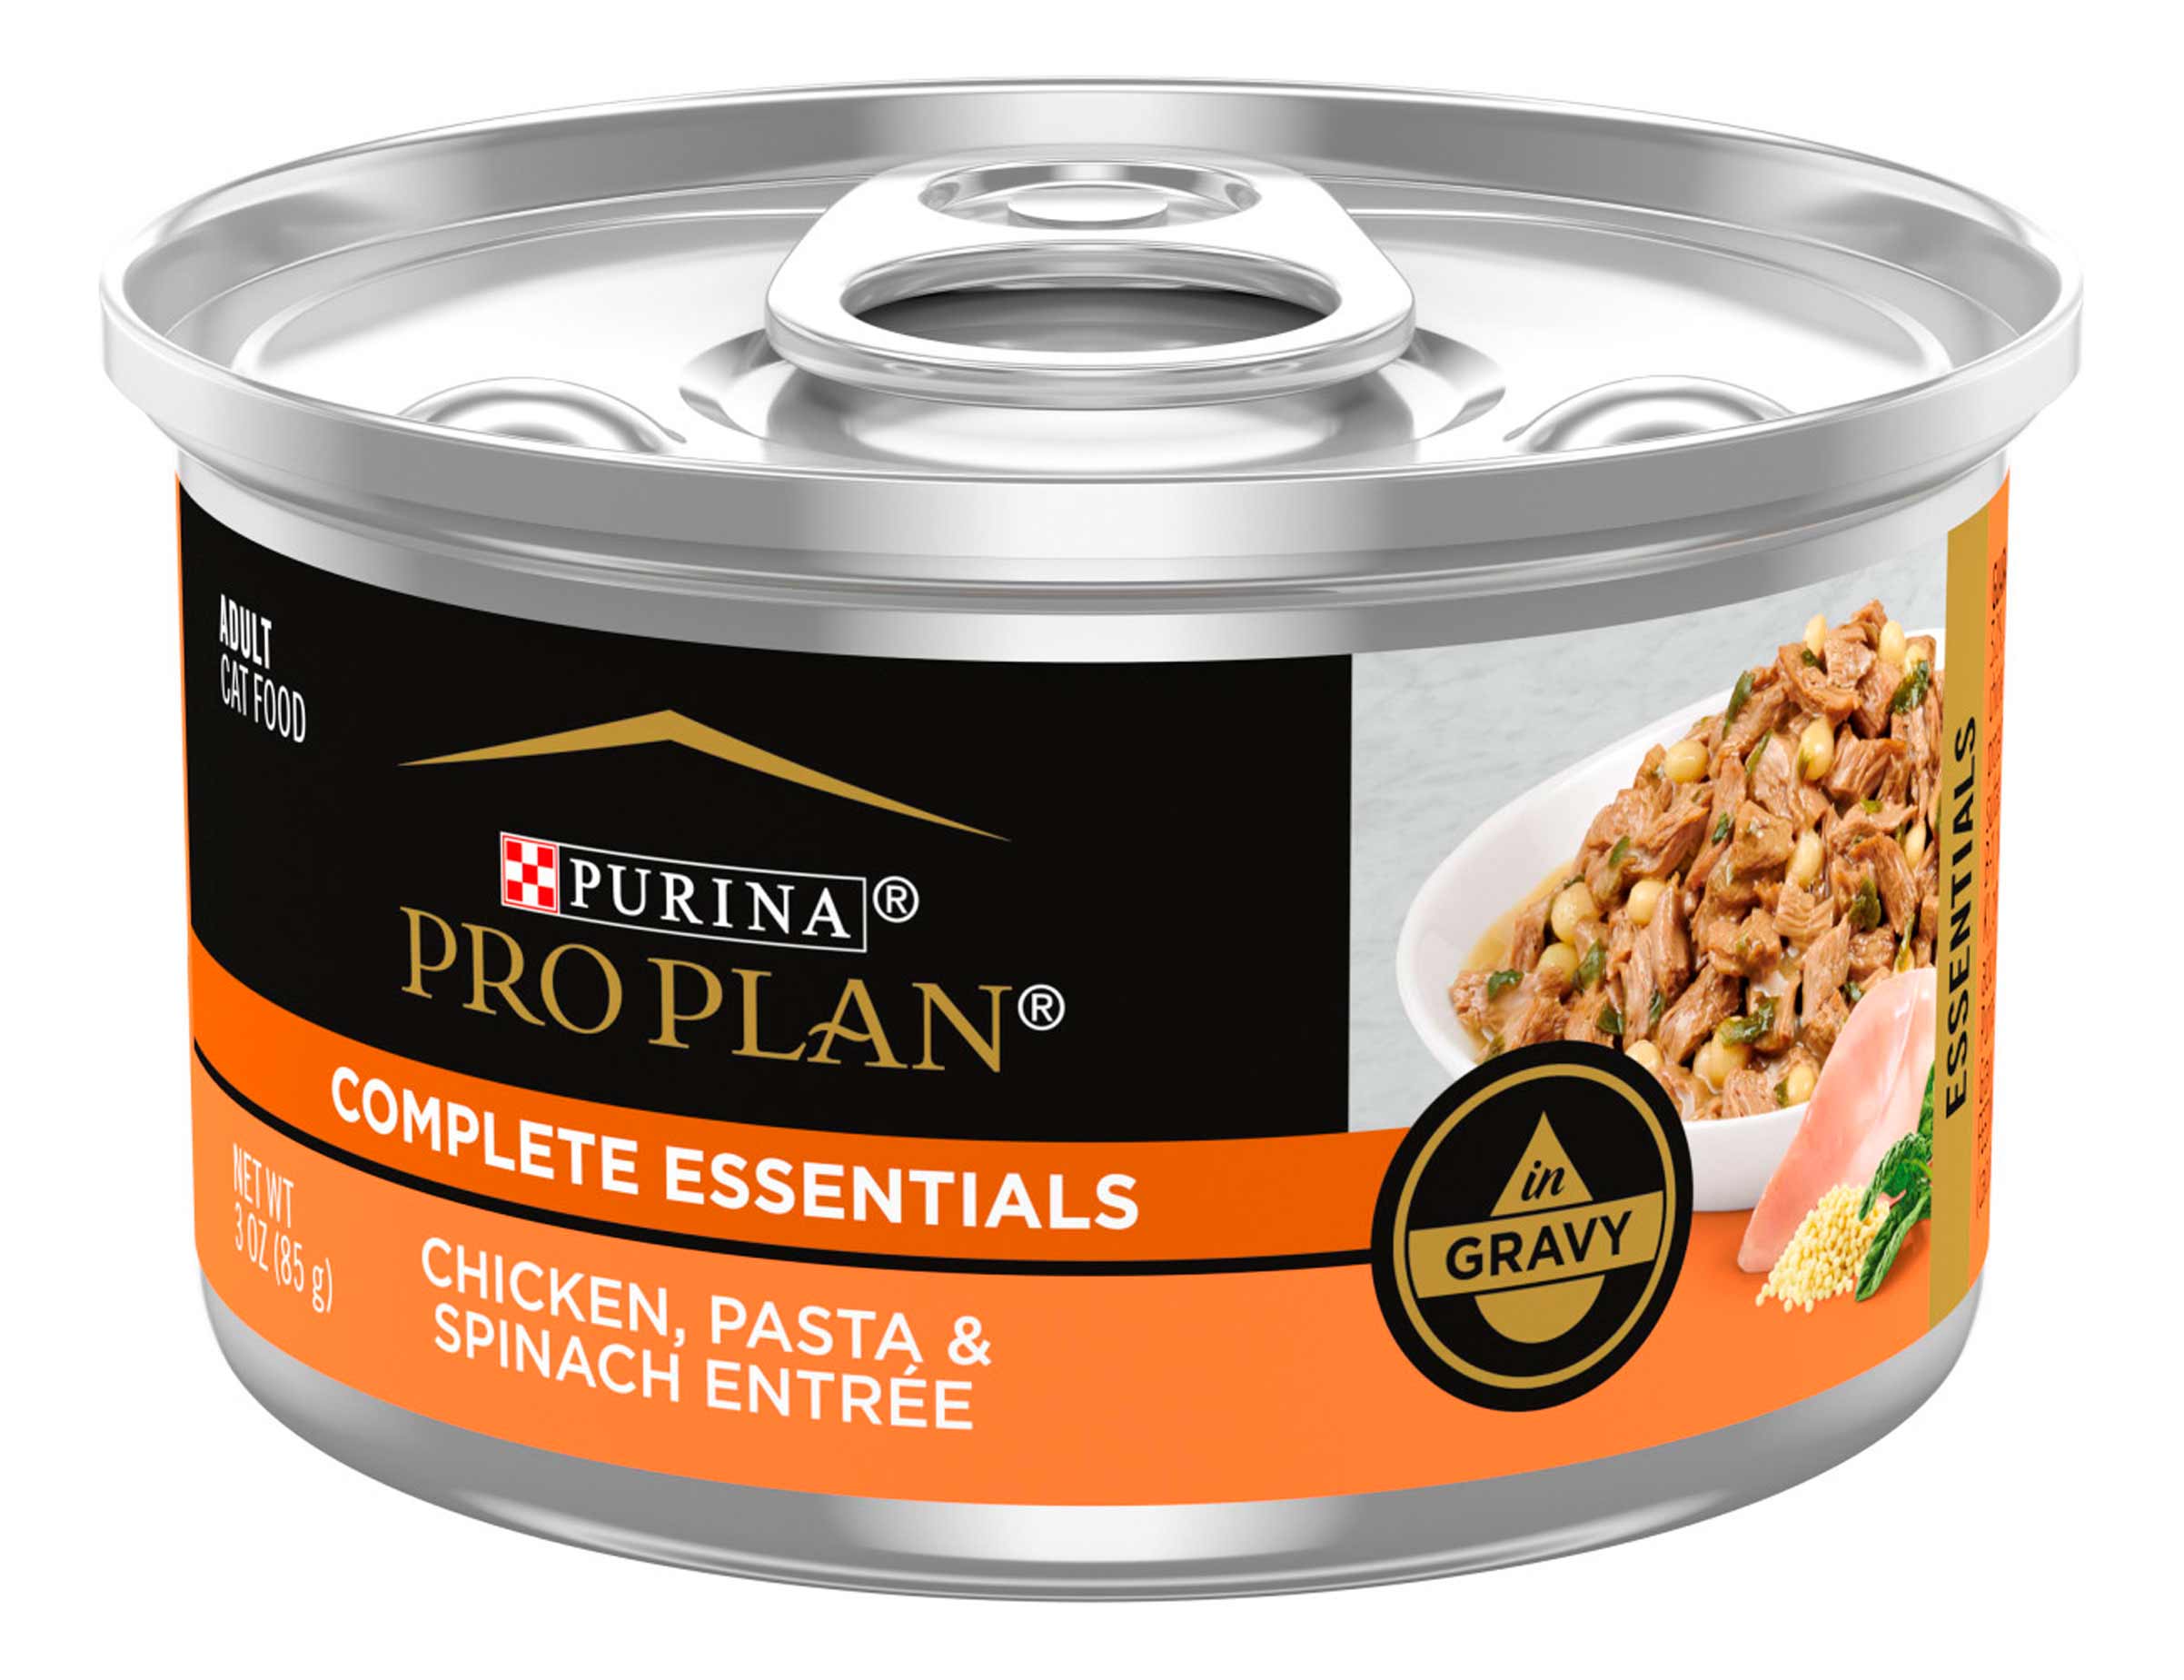 Purina Pro Plan Gravy Wet Cat Food, Chicken, Pasta & Spinach Entree - 3 Ounce Pull-Top Can